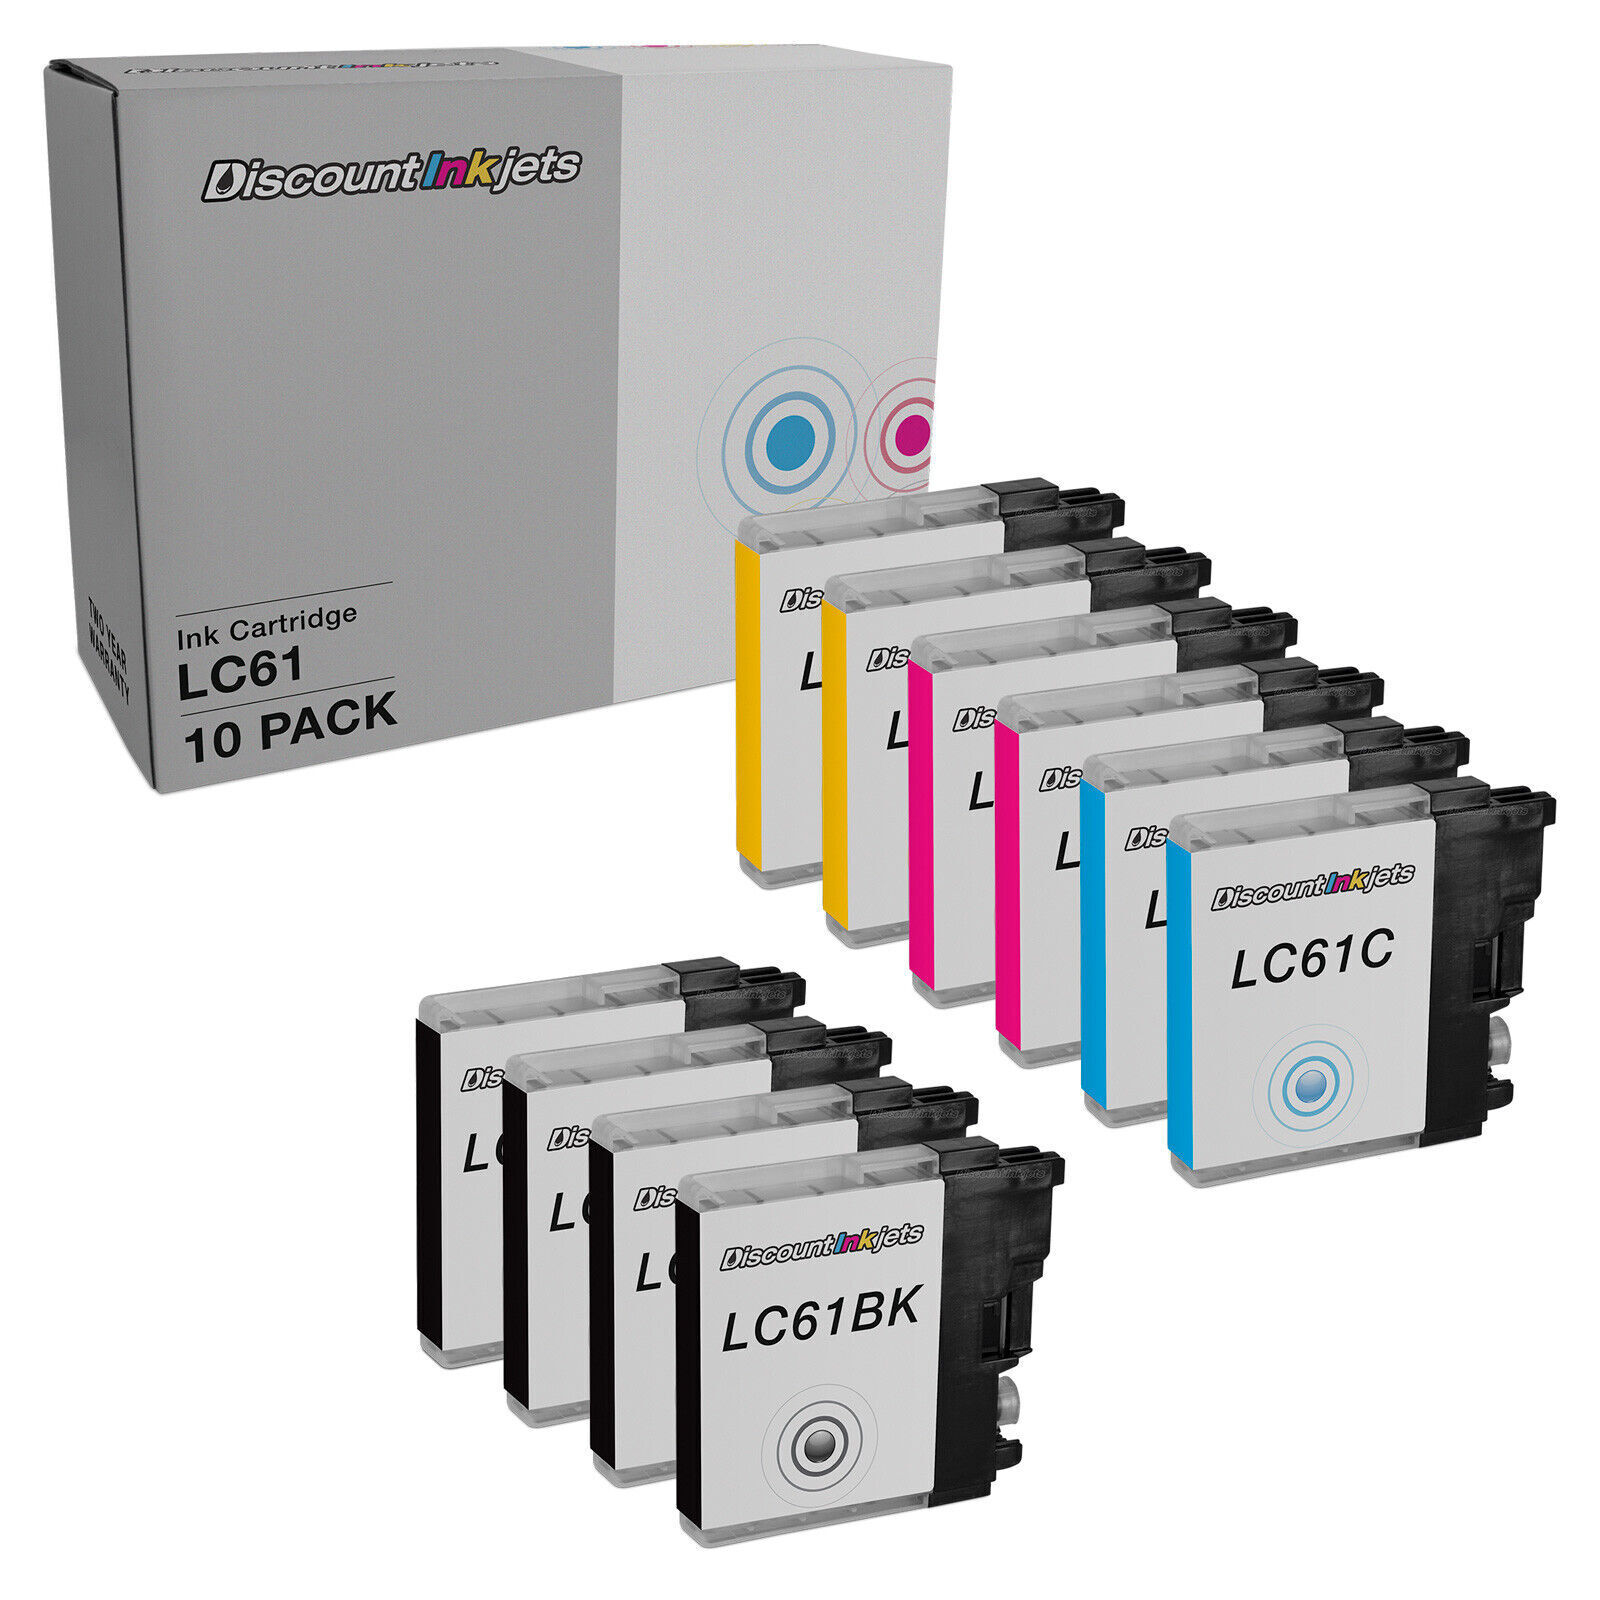 Compatible Ink Cartridge for Brother LC61 Series (4 B, 2 C, 2 M, 2 Y, 10-Pk)